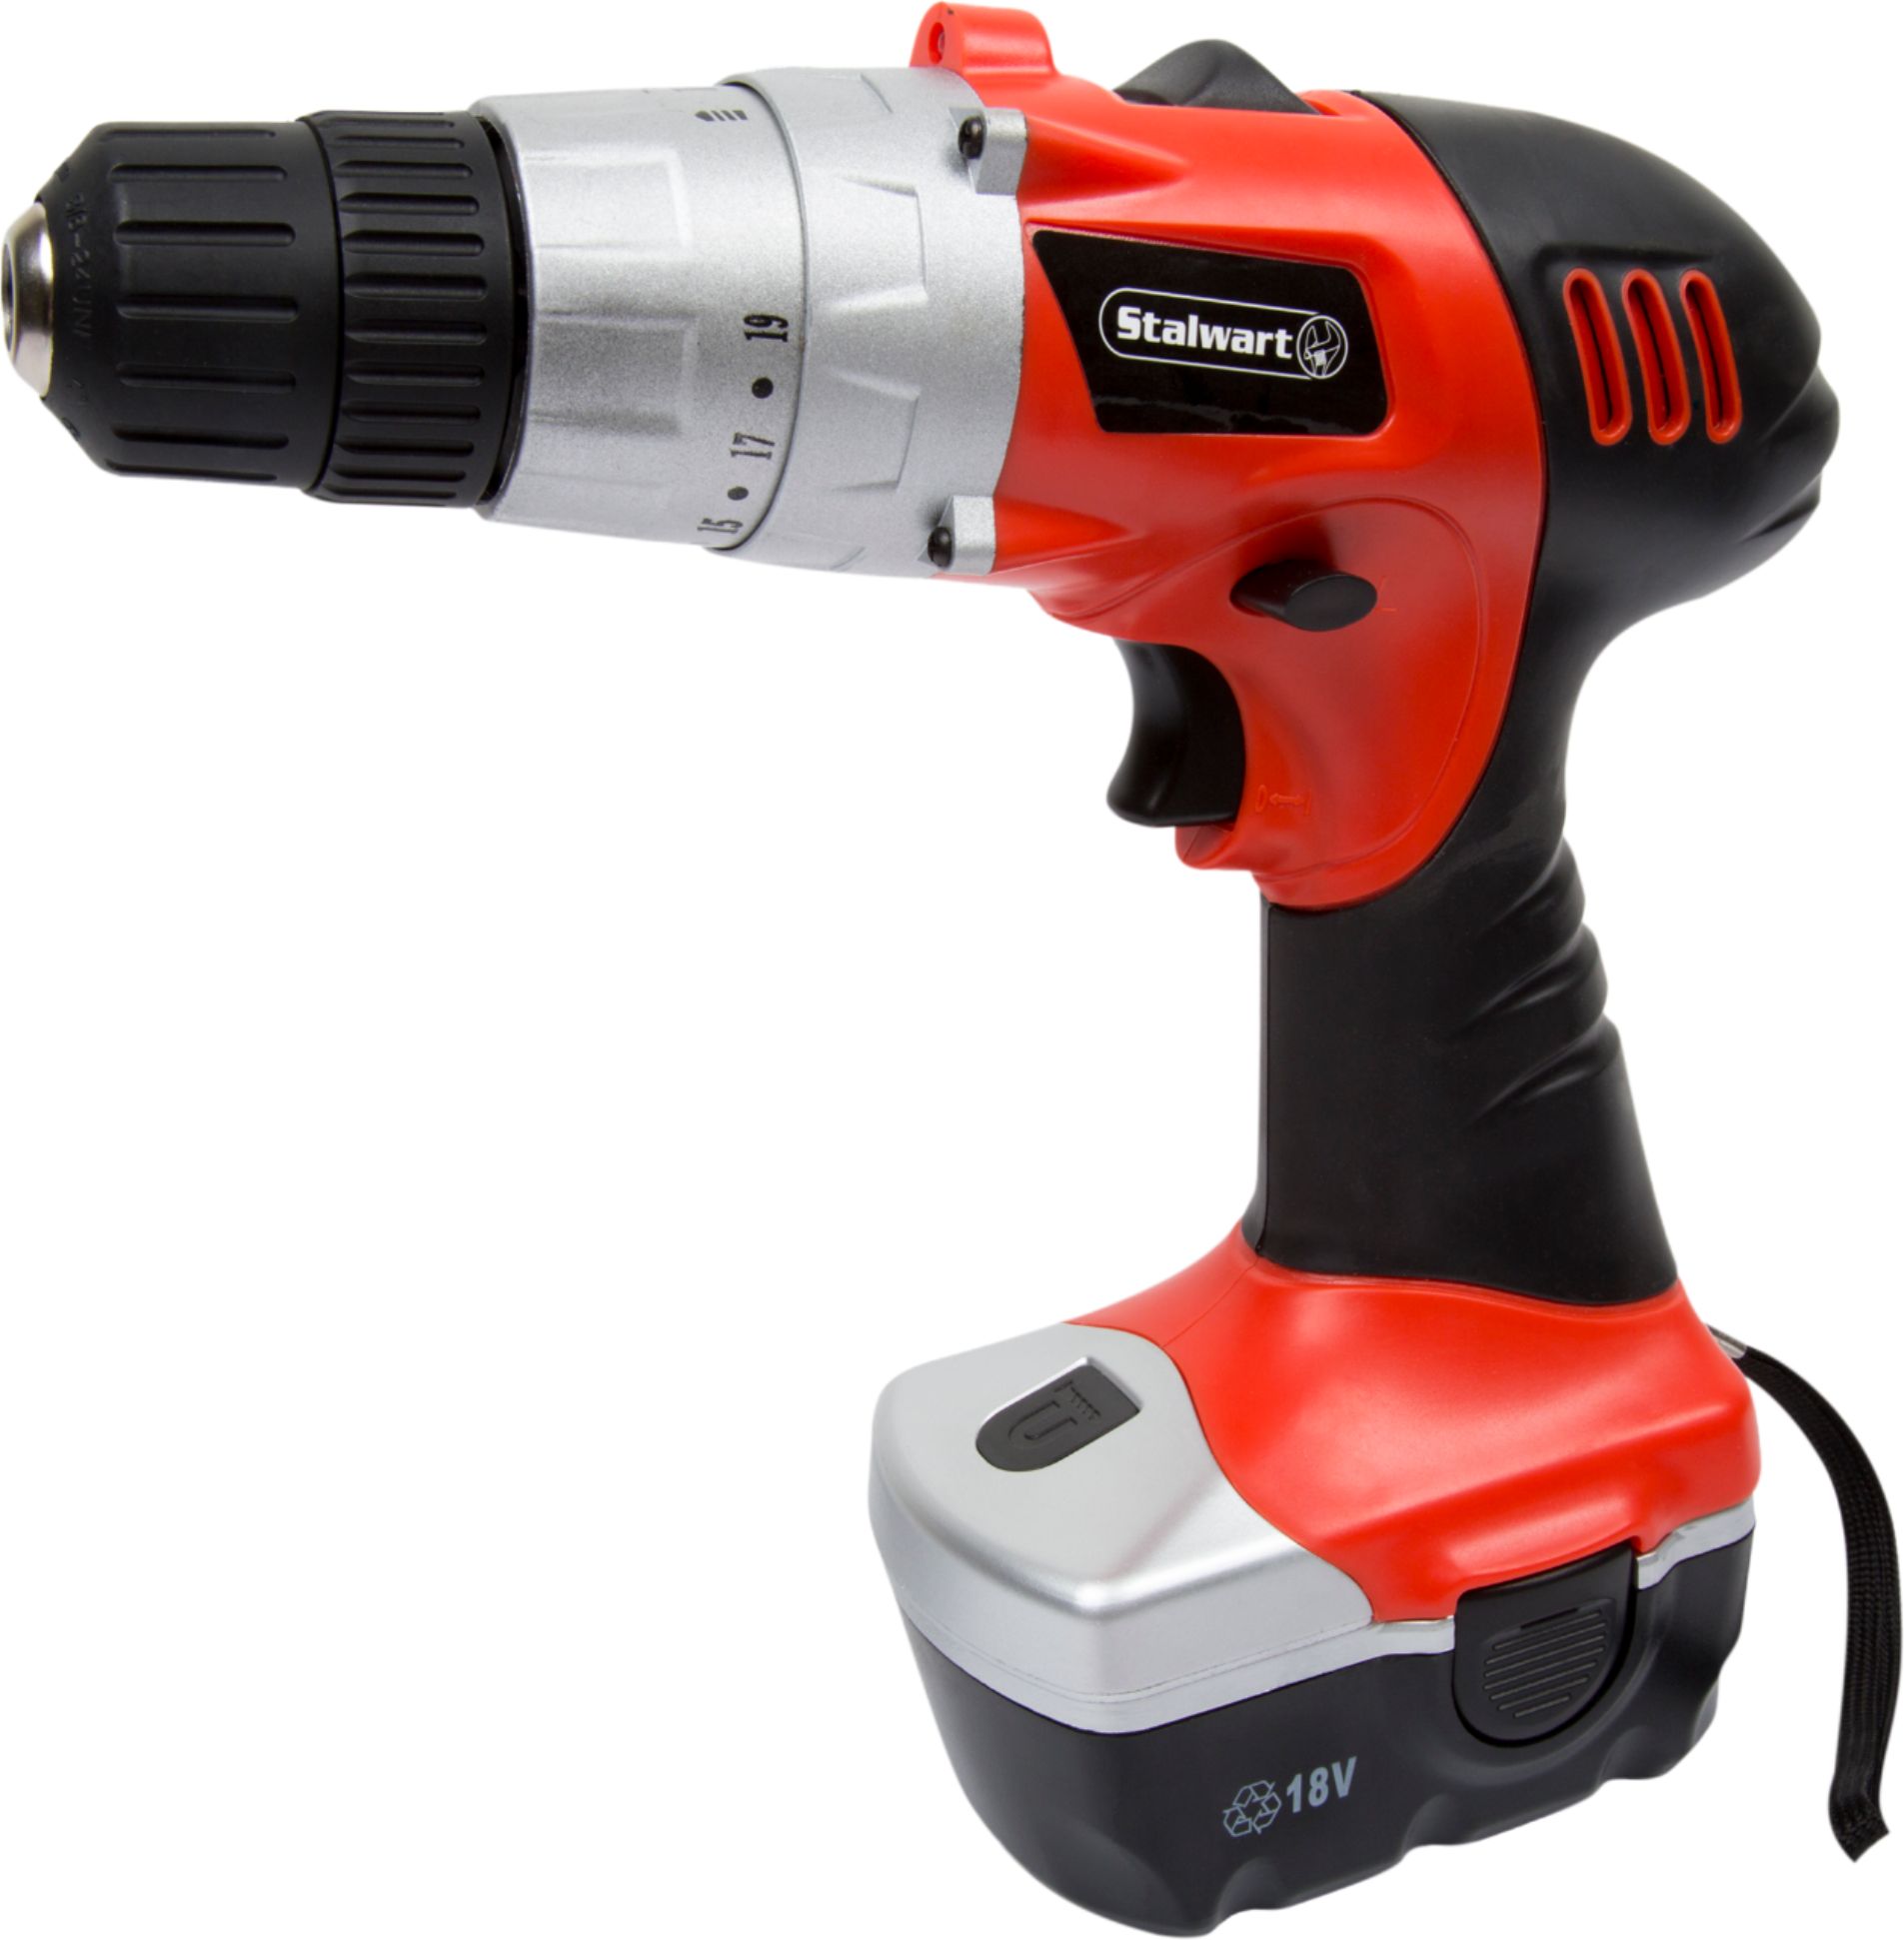 black and decker 18v cordless drill from